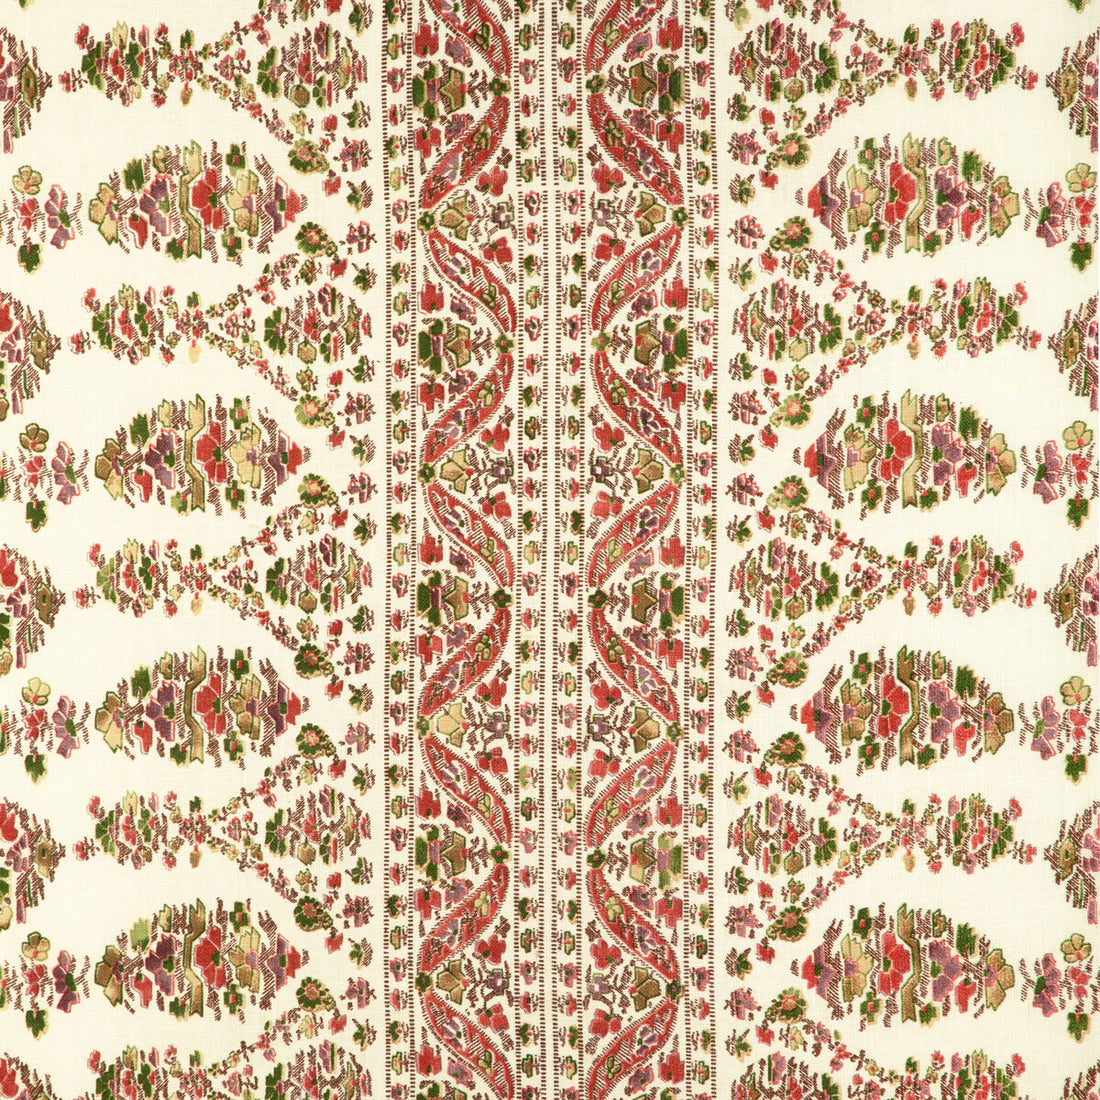 Visan Print fabric in rose/leaf color - pattern 8023108.73.0 - by Brunschwig &amp; Fils in the Cadenet collection